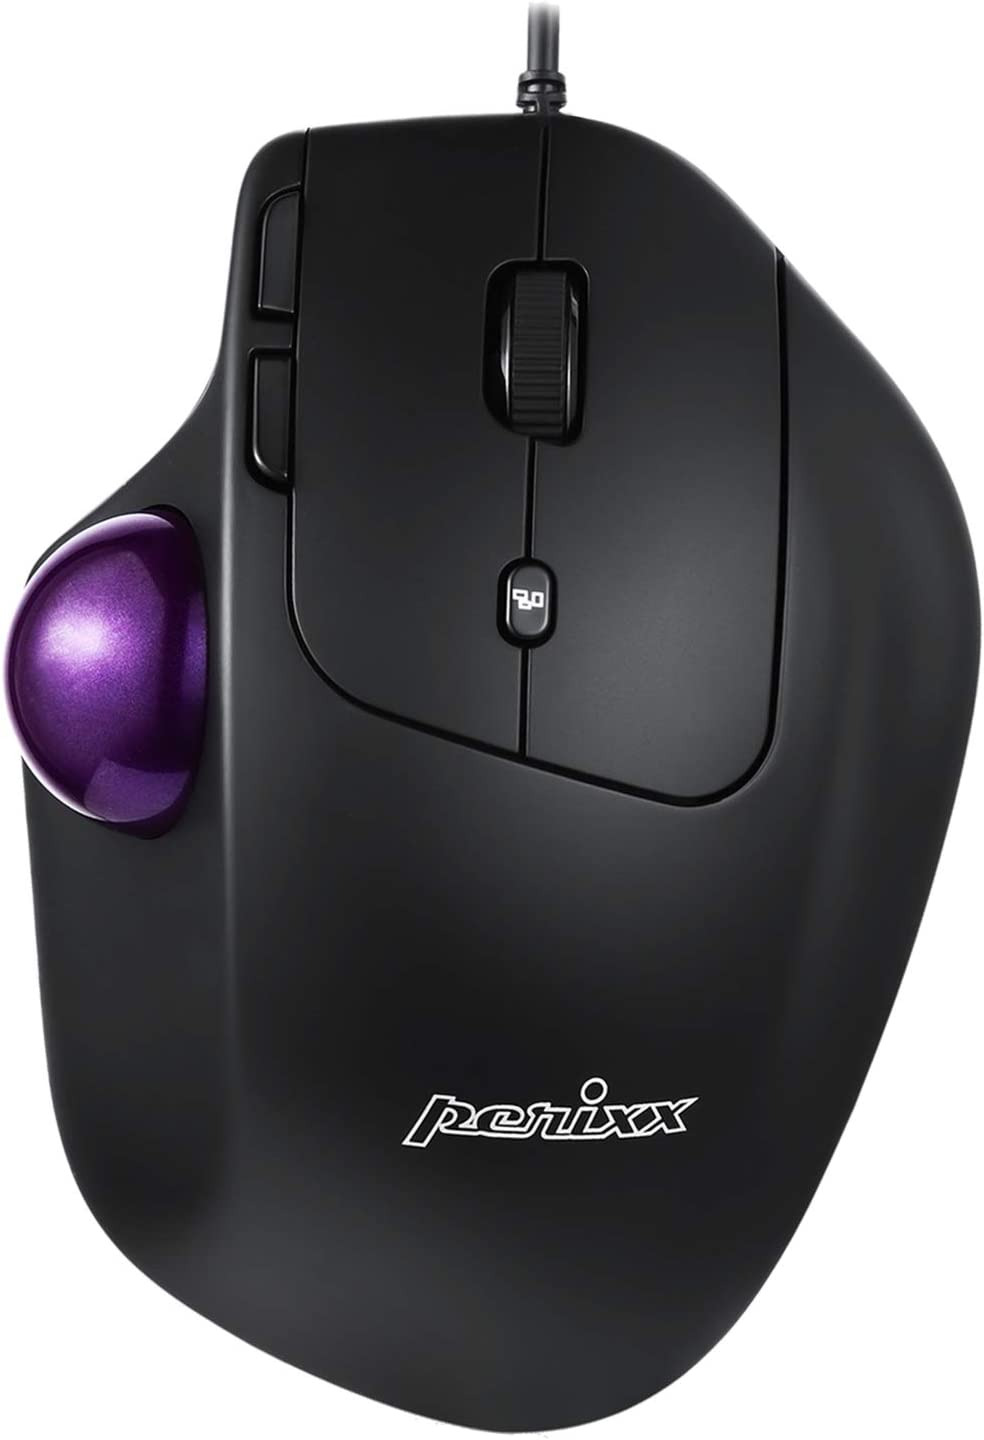 PERIMICE-520 Wired USB Ergonomic Programmable Trackball Mouse, Adjustable Angle,